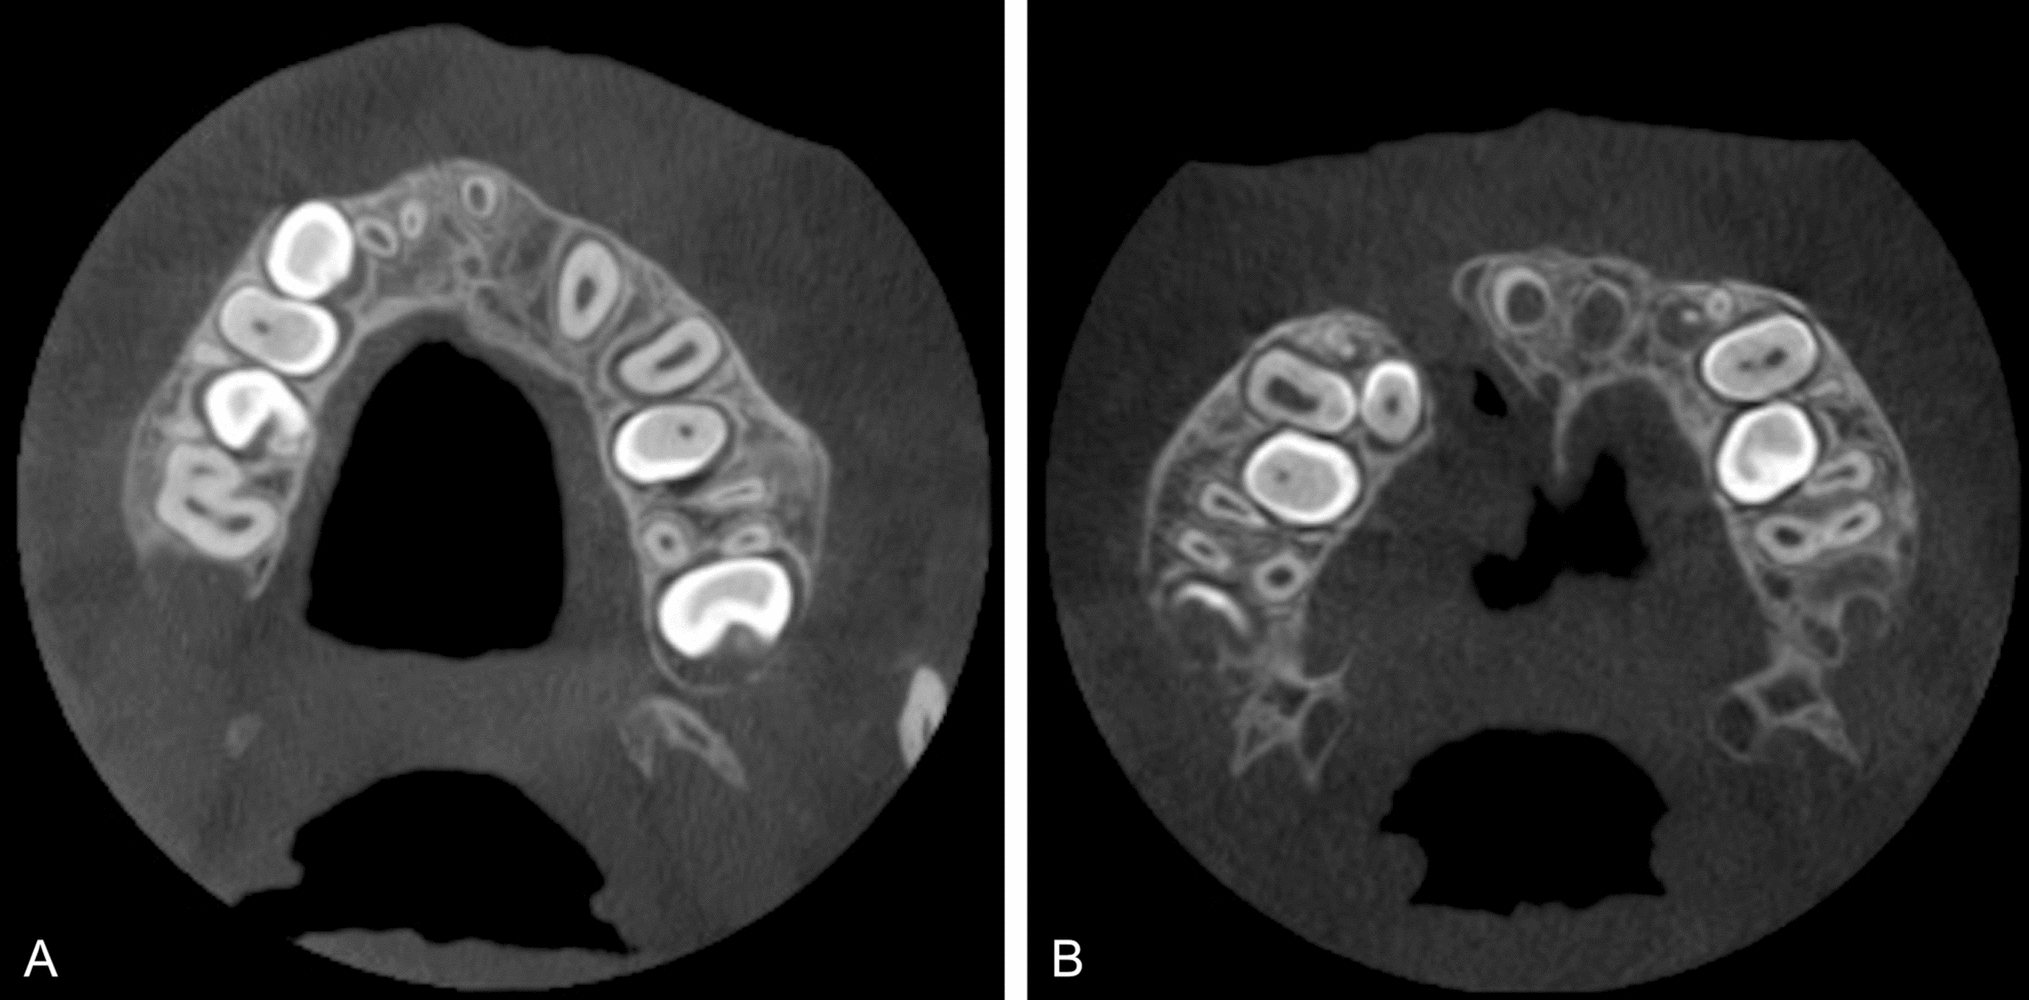 Quantitative assessment of cleft volume and evaluation of cleft’s impact on adjacent anatomical structures using CBCT imaging